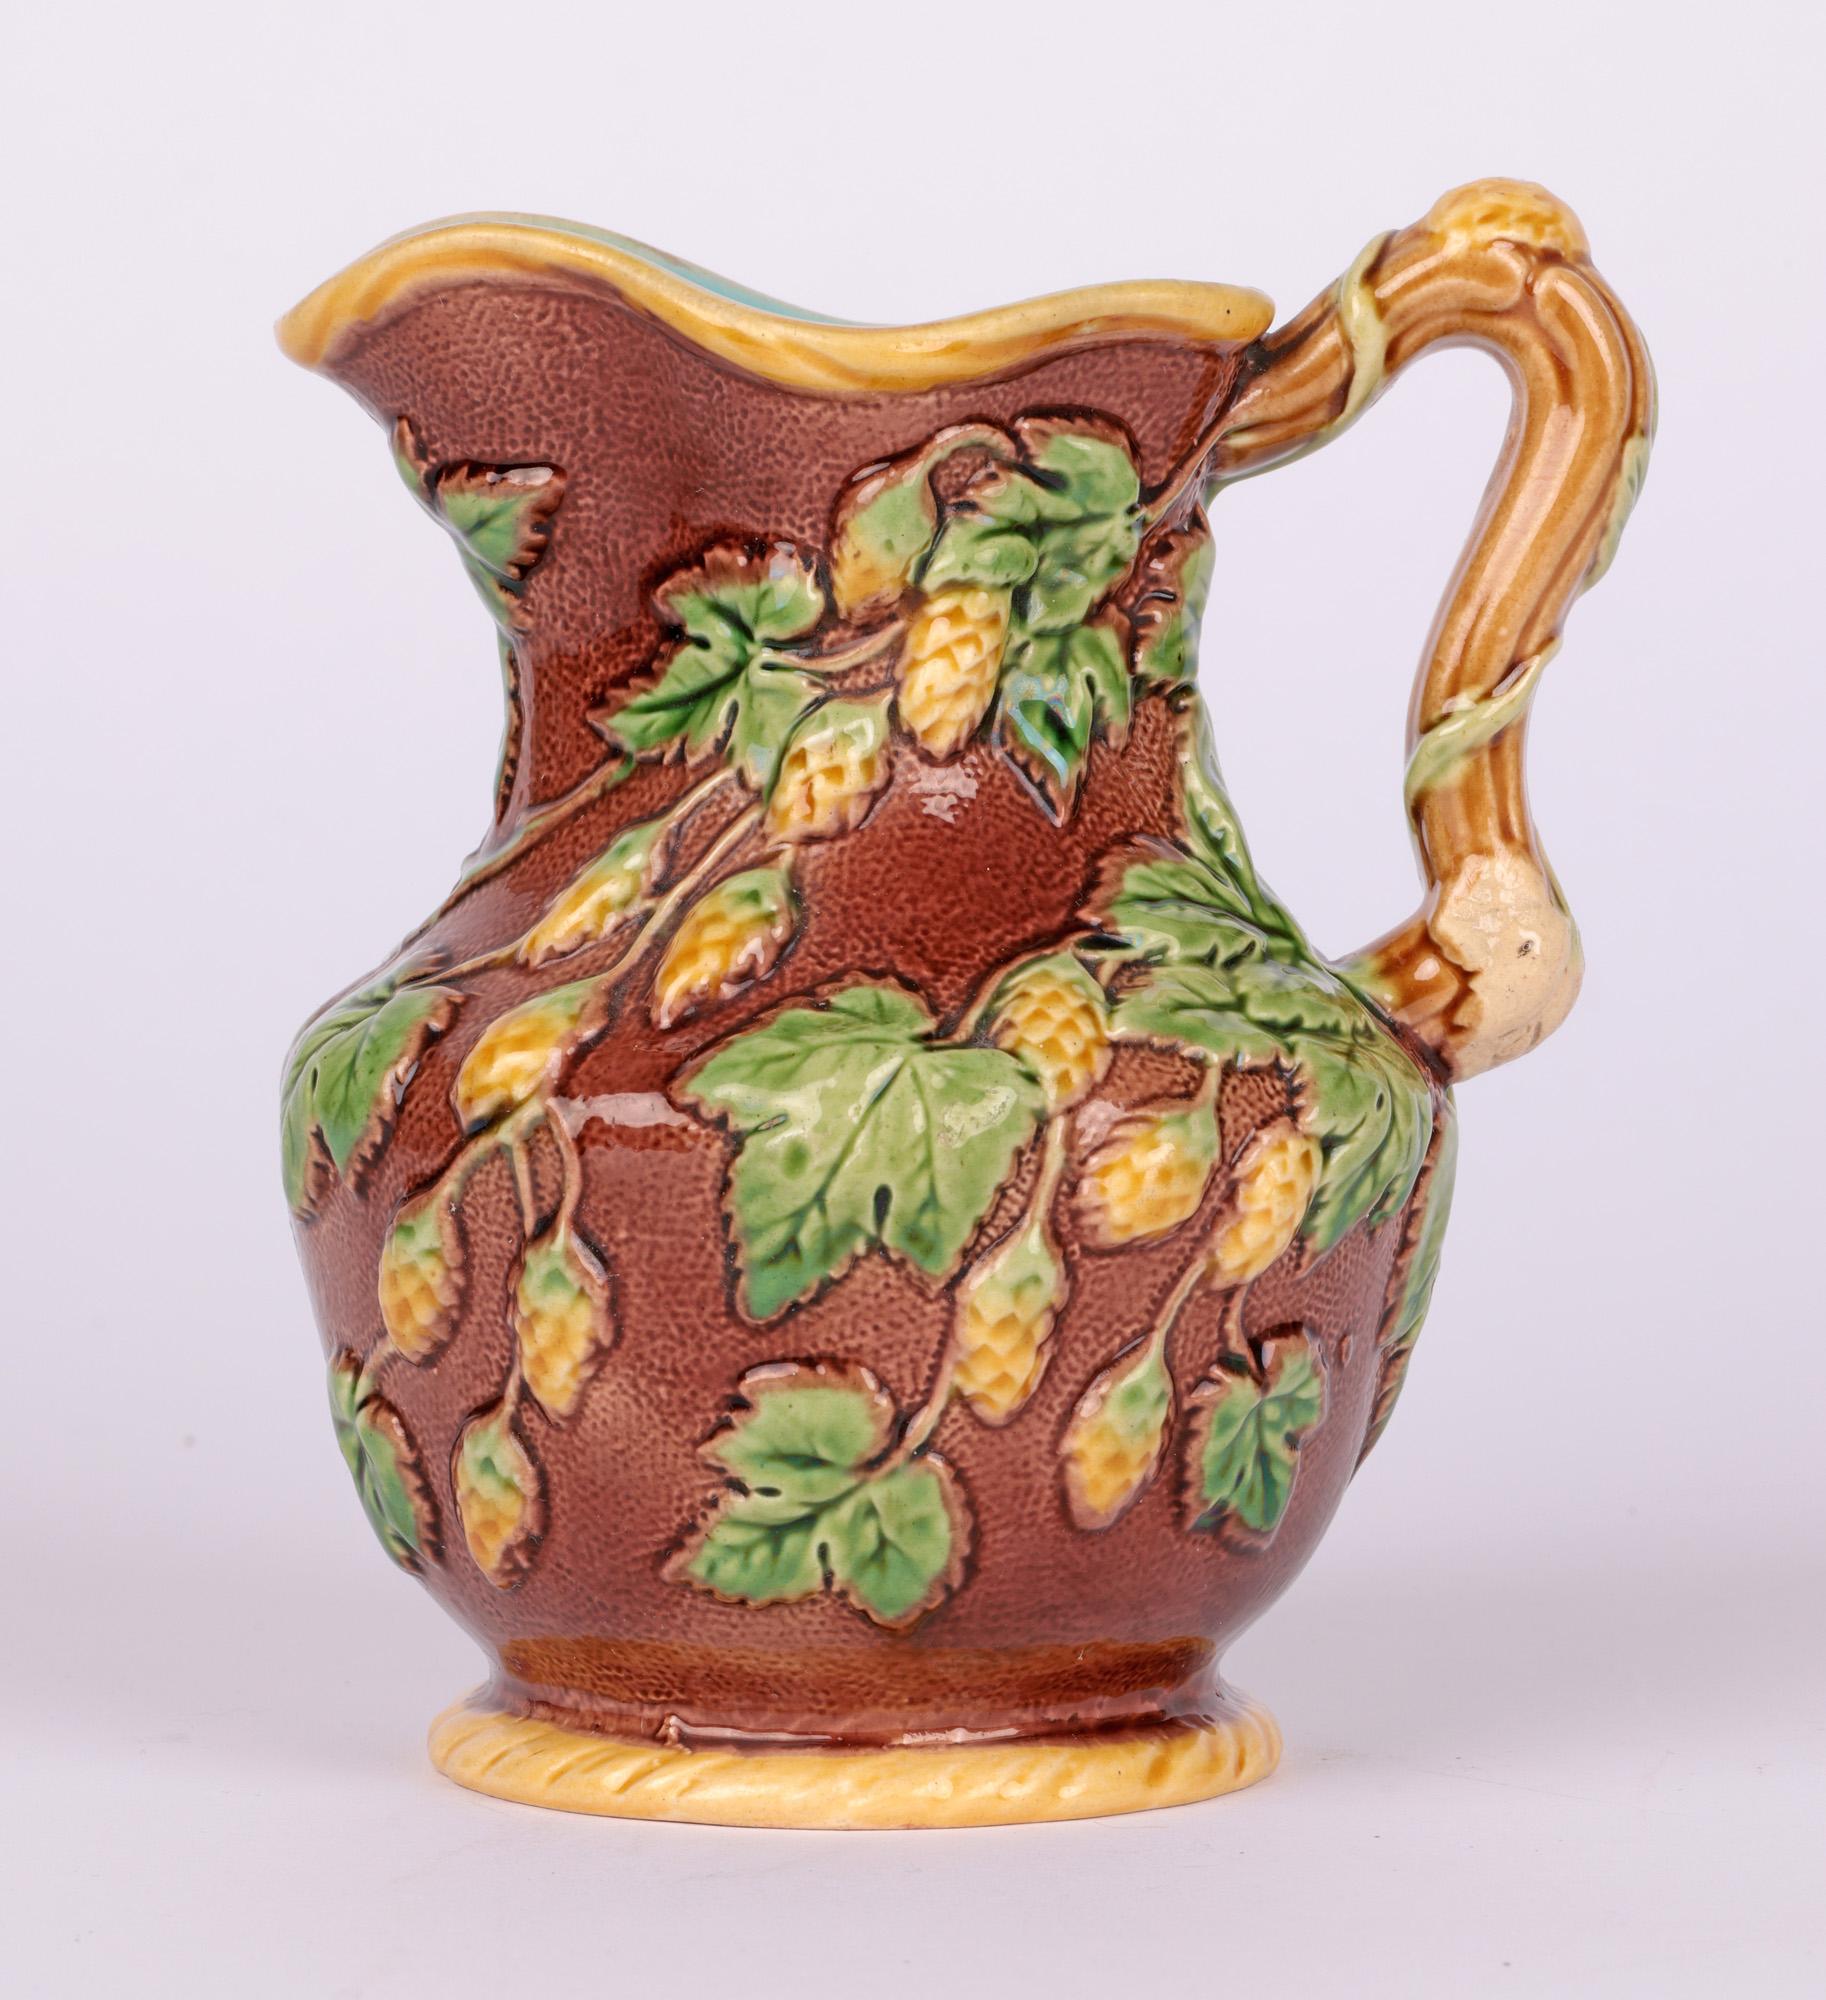 Glazed Minton Majolica Pottery Ale Jug Decorated with Hops